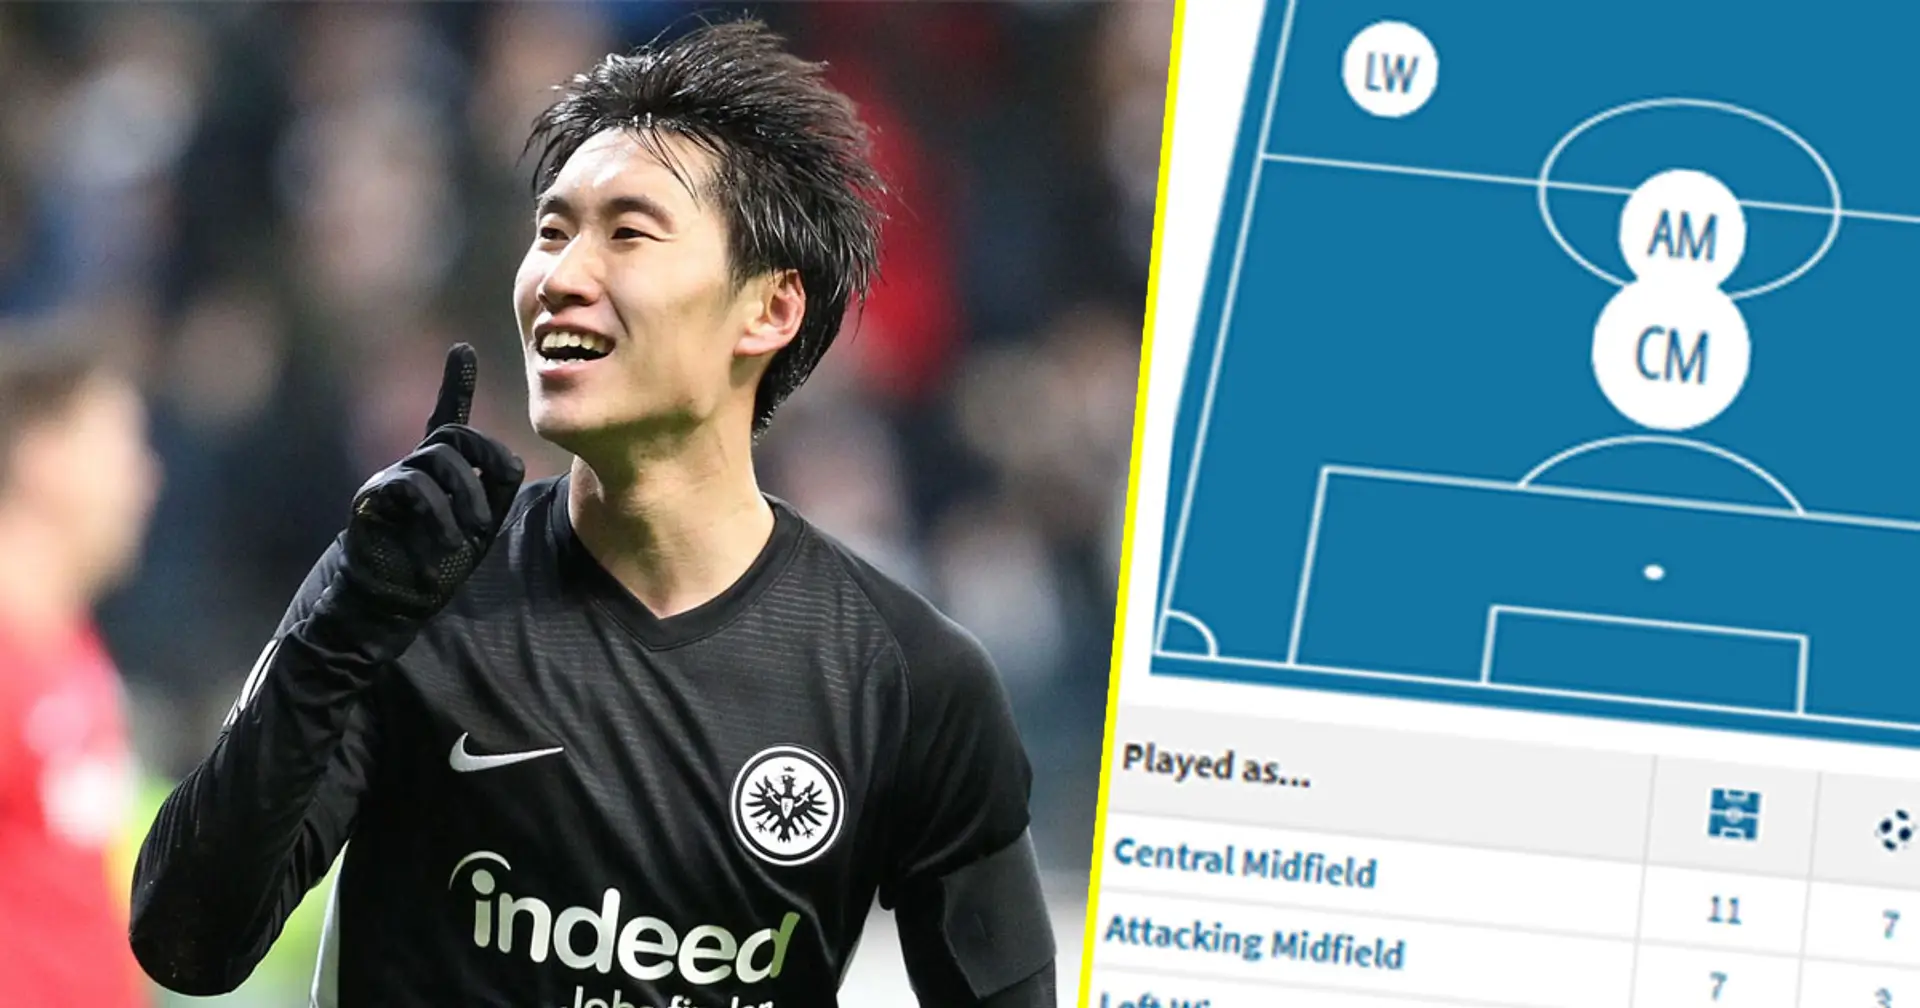 Japan star could become 'surprise signing' for Barca - he has 12 goals this season as a playmaker (reliability: 3 stars)